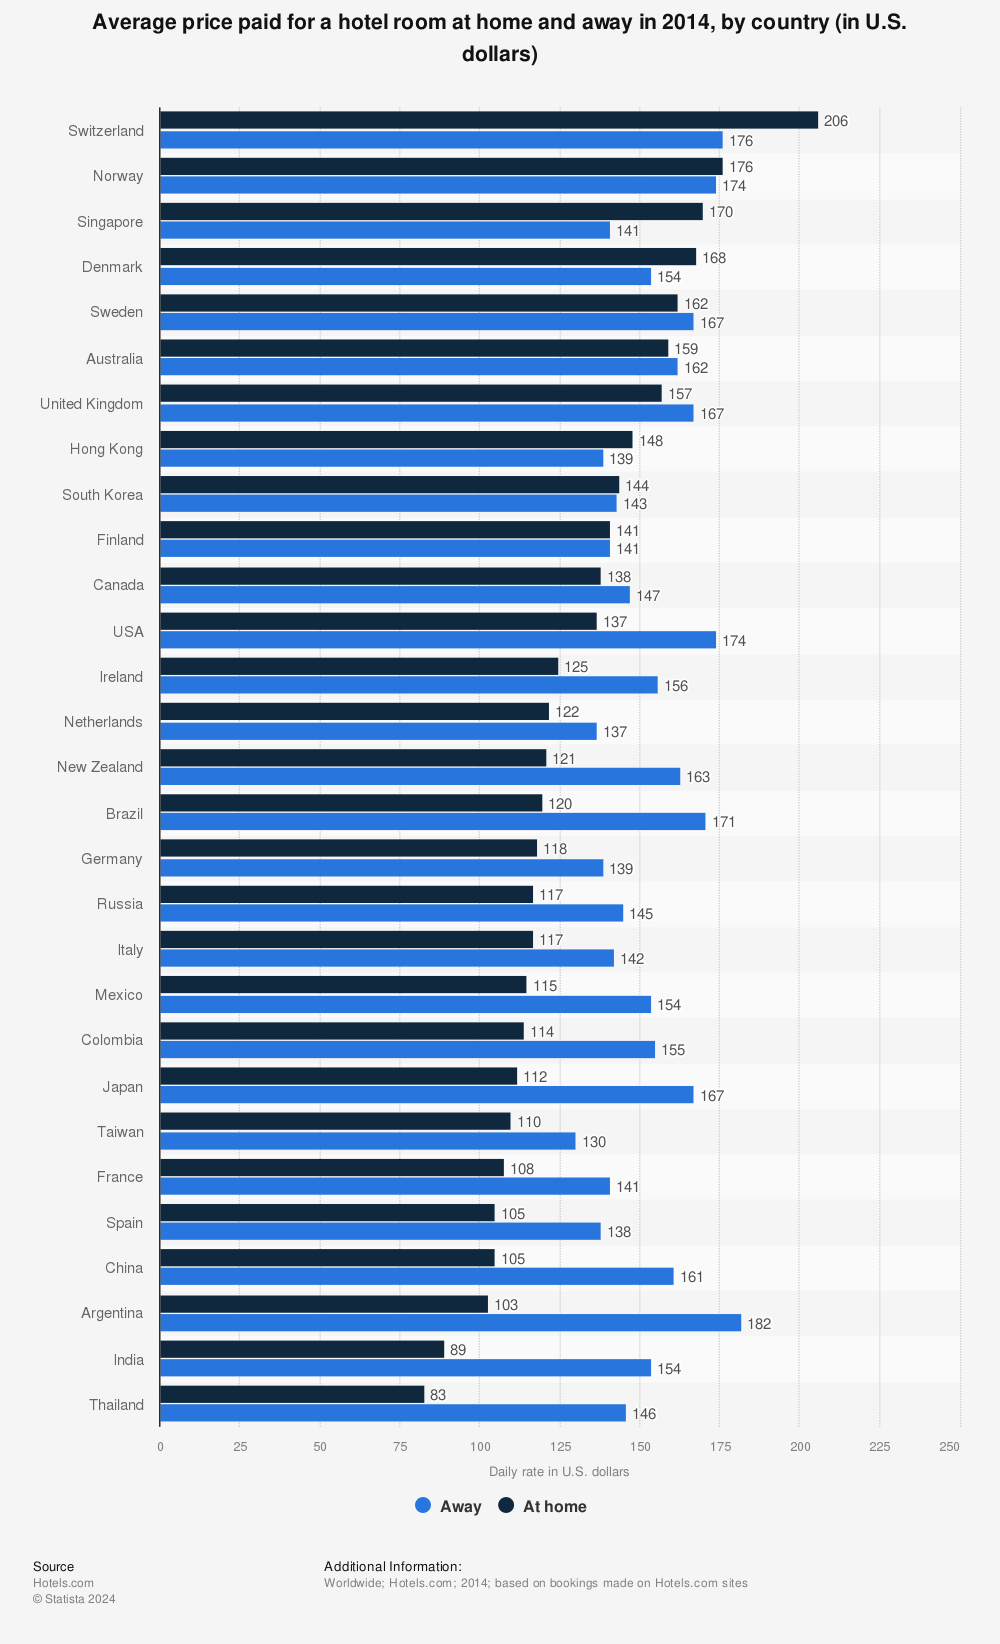 Statistic: Average price paid for a hotel room at home and away in 2014, by country (in U.S. dollars) | Statista